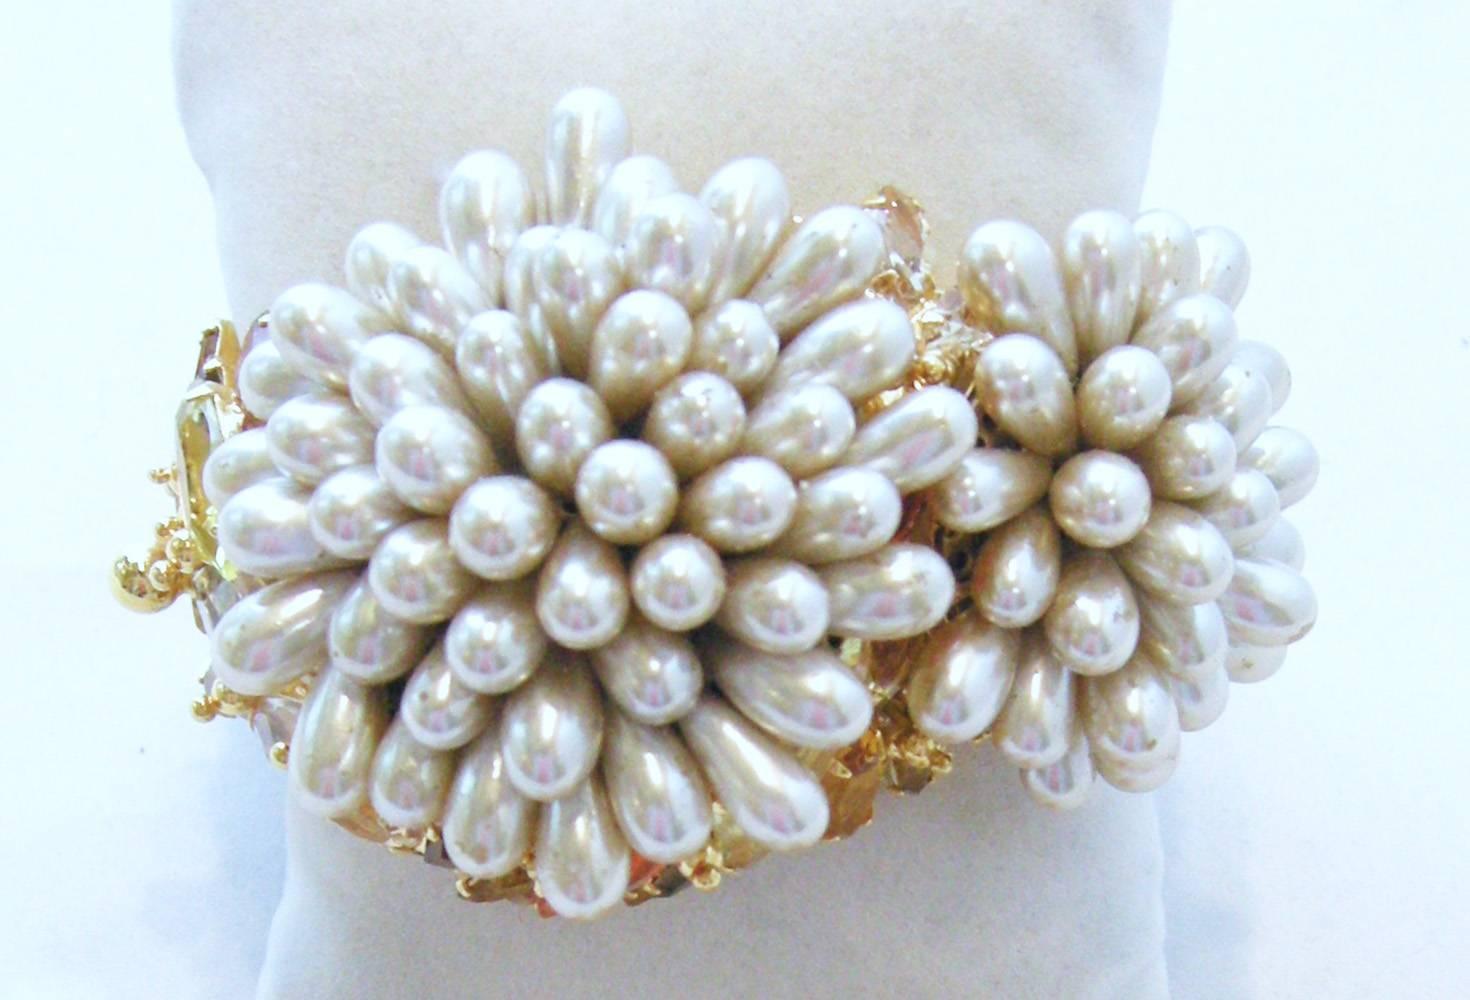 This outstanding Robert Sorrell cuff bracelets has 2 flower beads of vintage glass and pearl teardrops.  Crystals set off by topaz, jonquil and Hyacinth crystals.  It is a spring-hinged cuff with a slide in clasp.  It is 7-1/4” x 1-1/2”.  The center